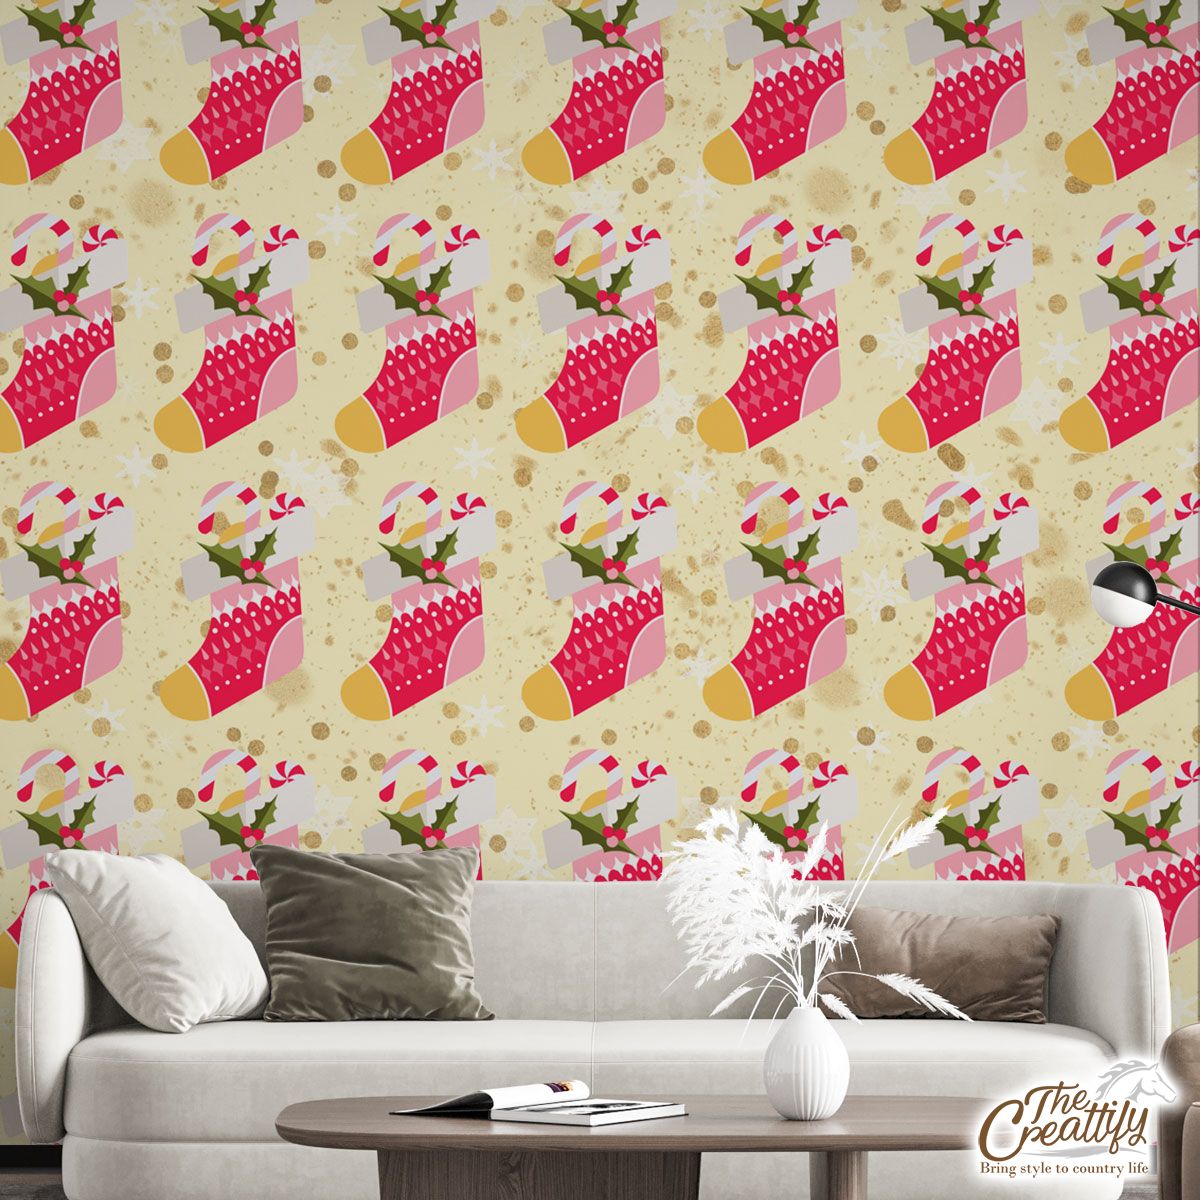 Red Socks, Christmas Socks With Candy Canes Wall Mural